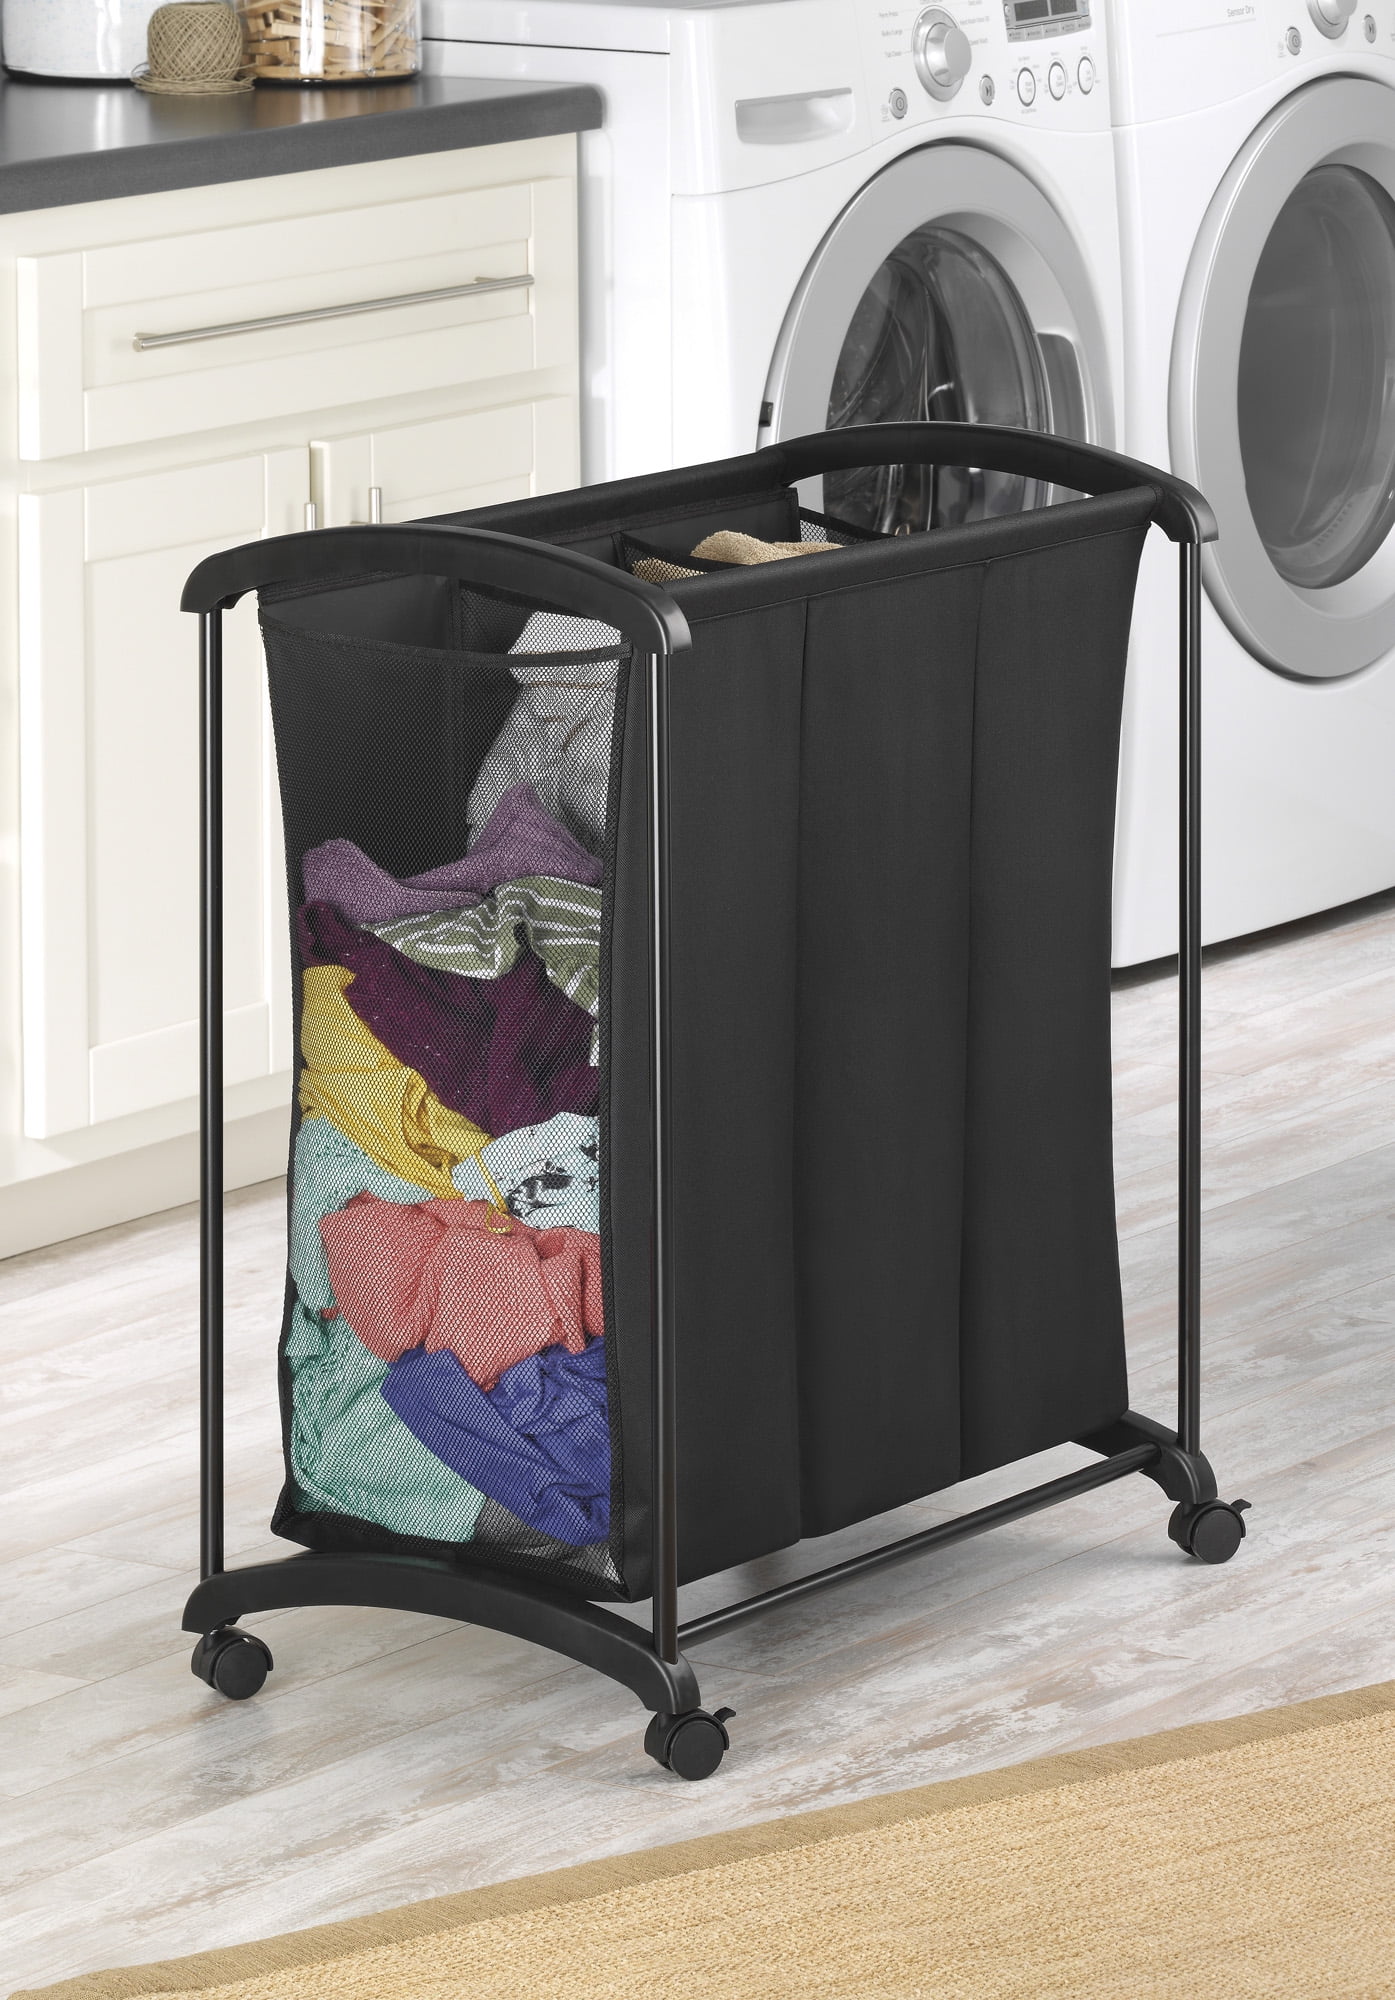 Whitmor 3 Section Laundry Sorter with Wheels Black 16.5" x 28.5" x 30.75"